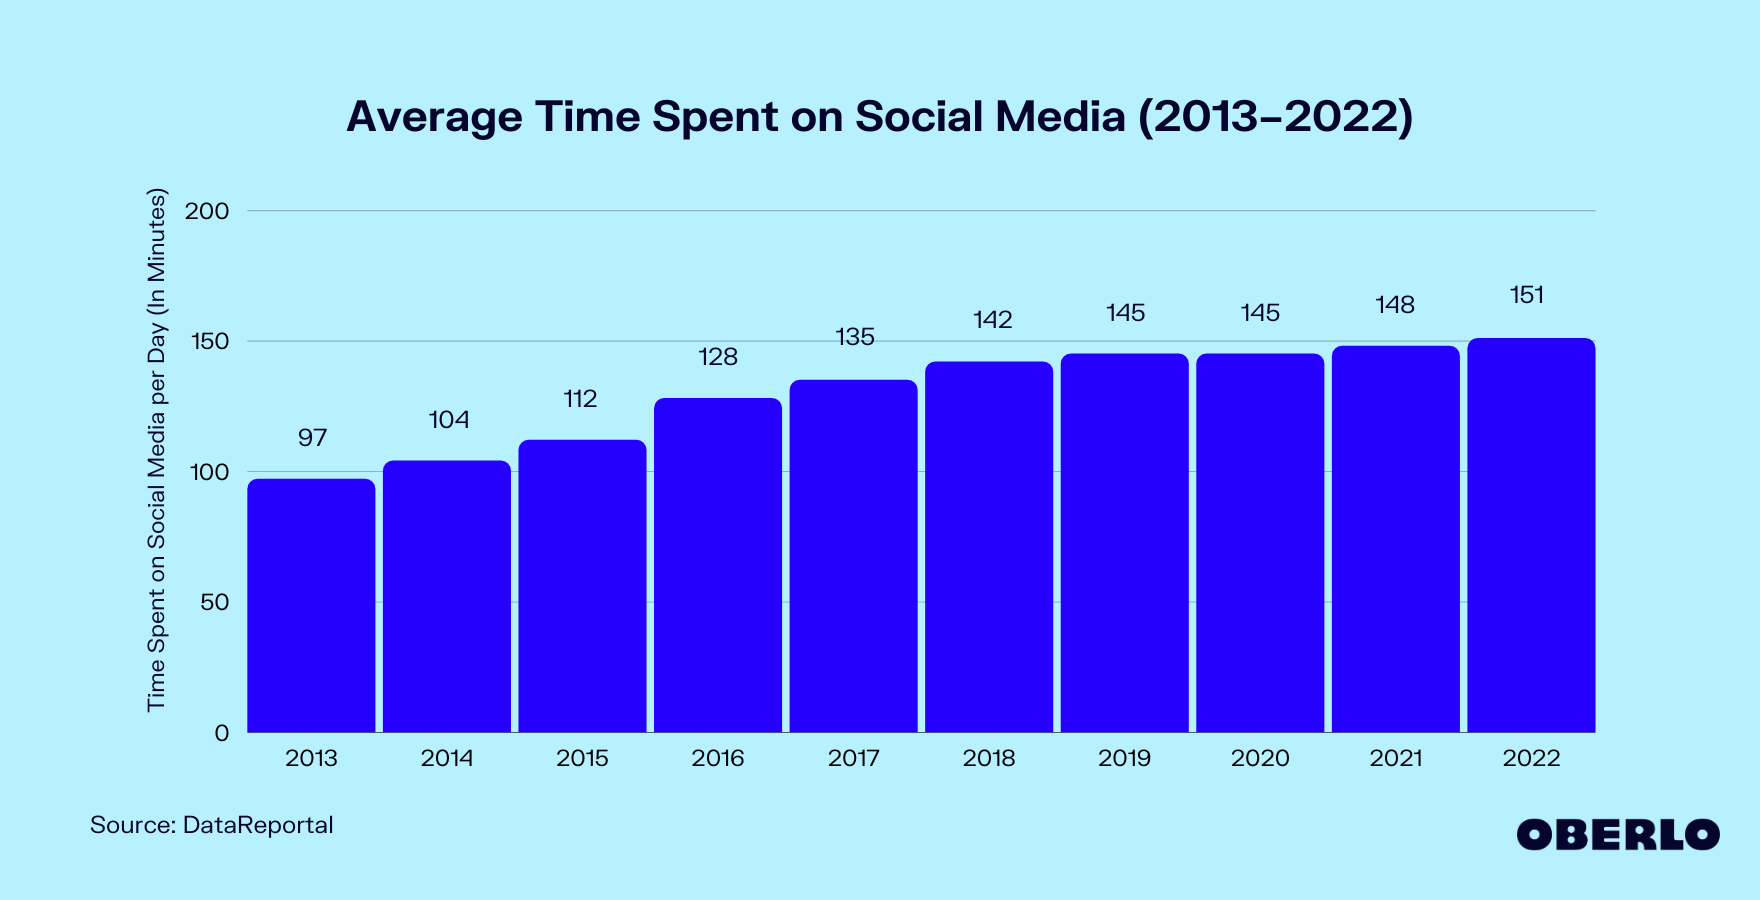 Progressive rise in social media user engagement over a decade depicted in a bar chart. From 97 minutes in 2013, the time spent by users surged steadily to 151 minutes by 2022, illustrating a consistent upward trend in engagement.